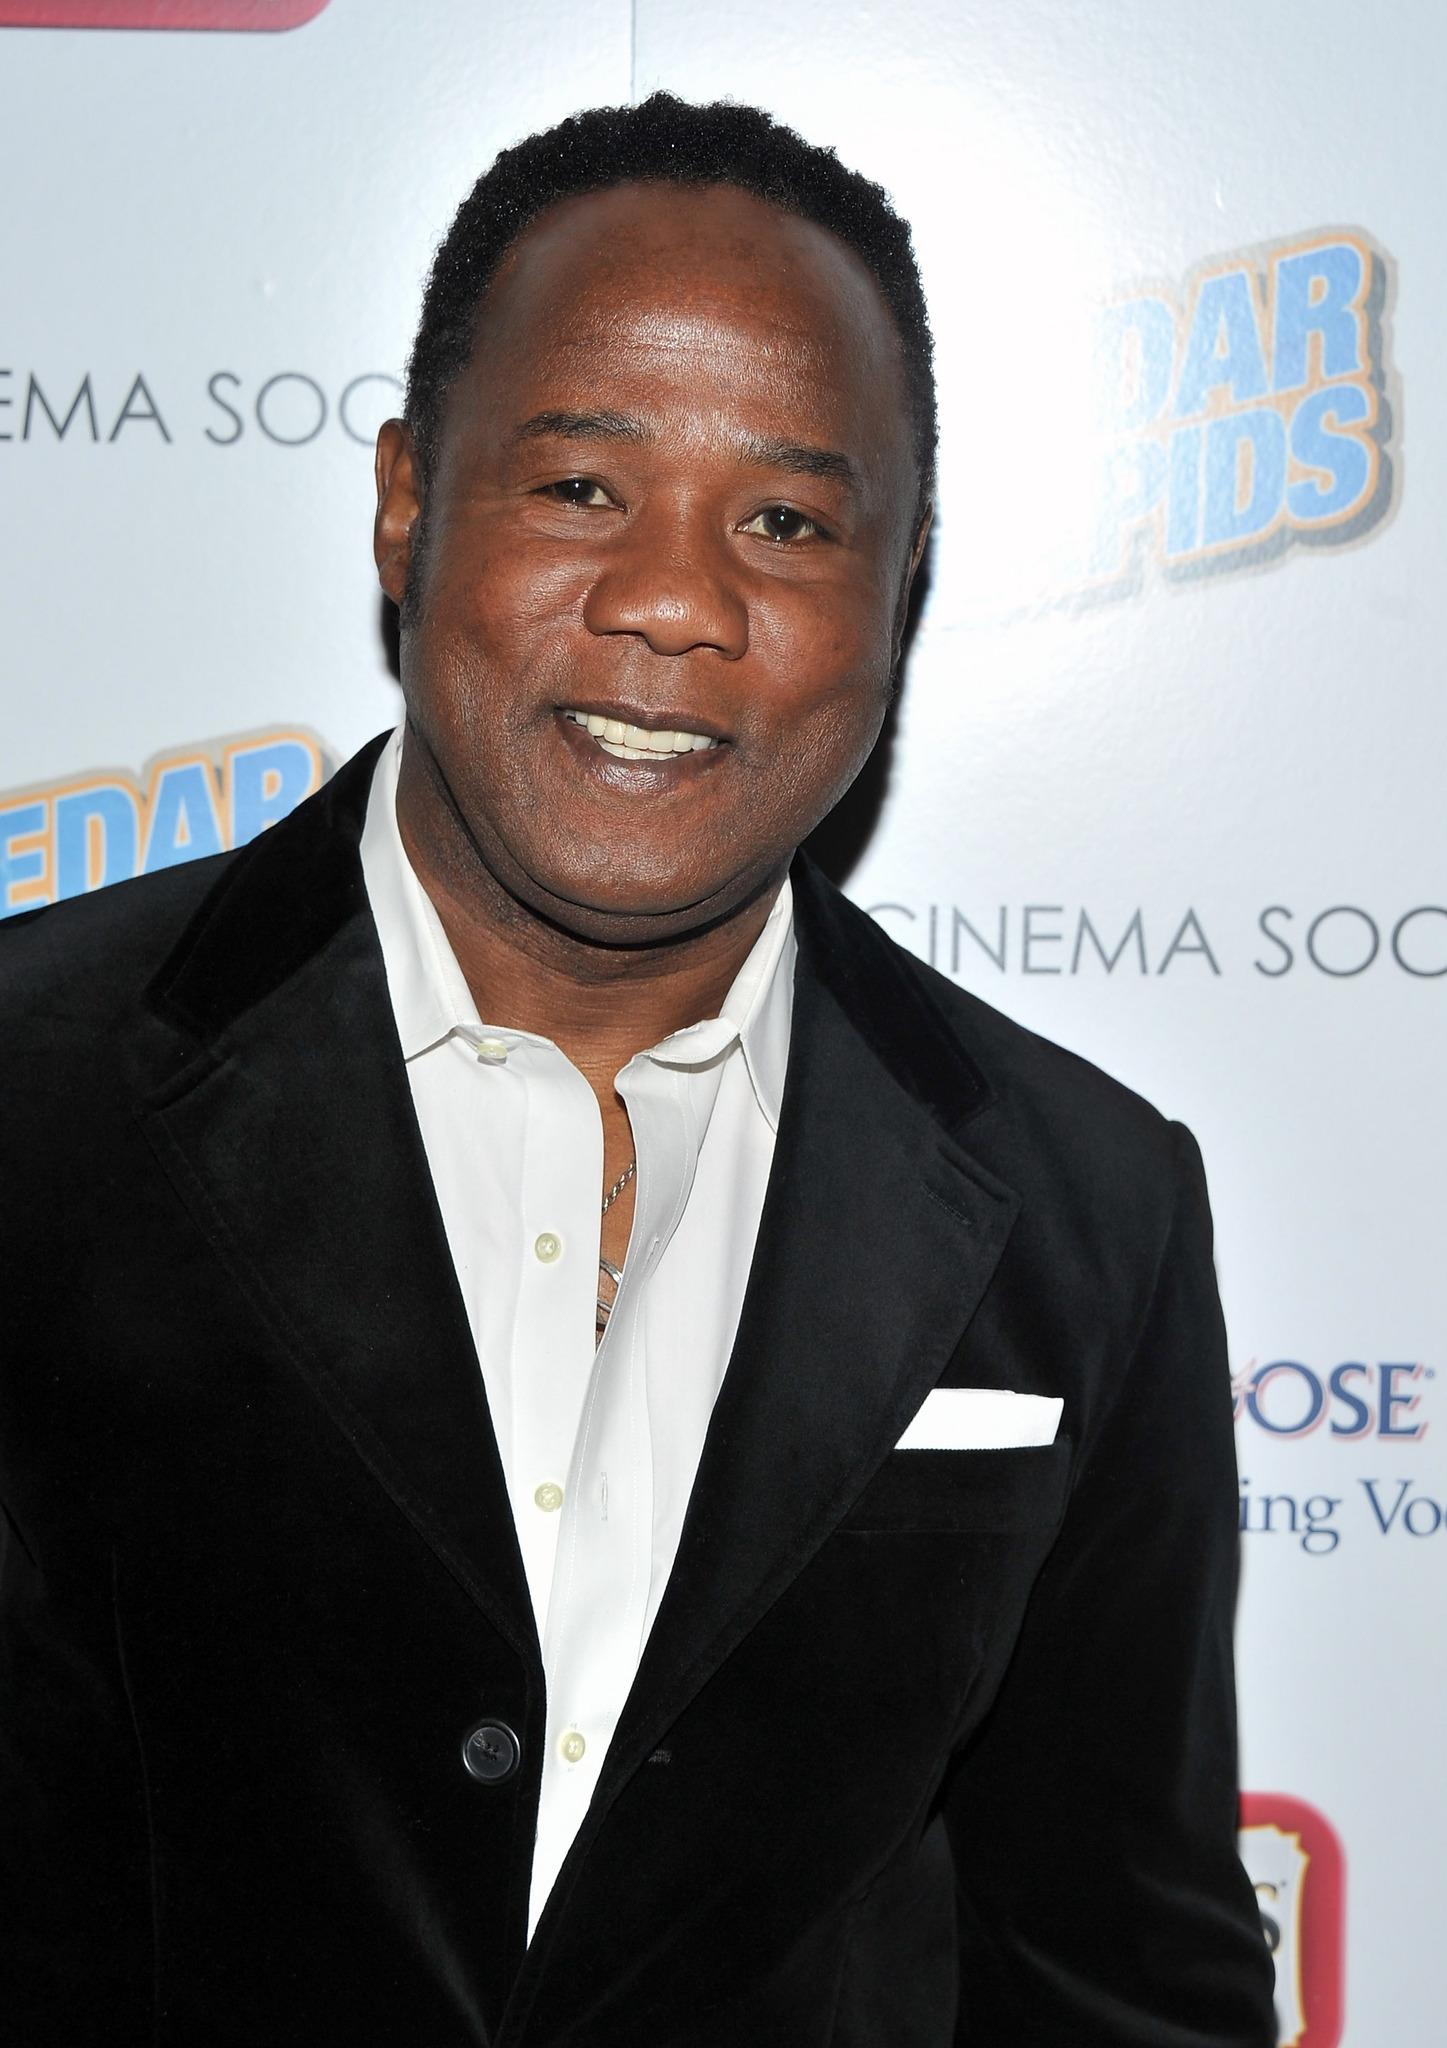 Pictures of Isiah Whitlock, Jr. - Pictures Of Celebrities